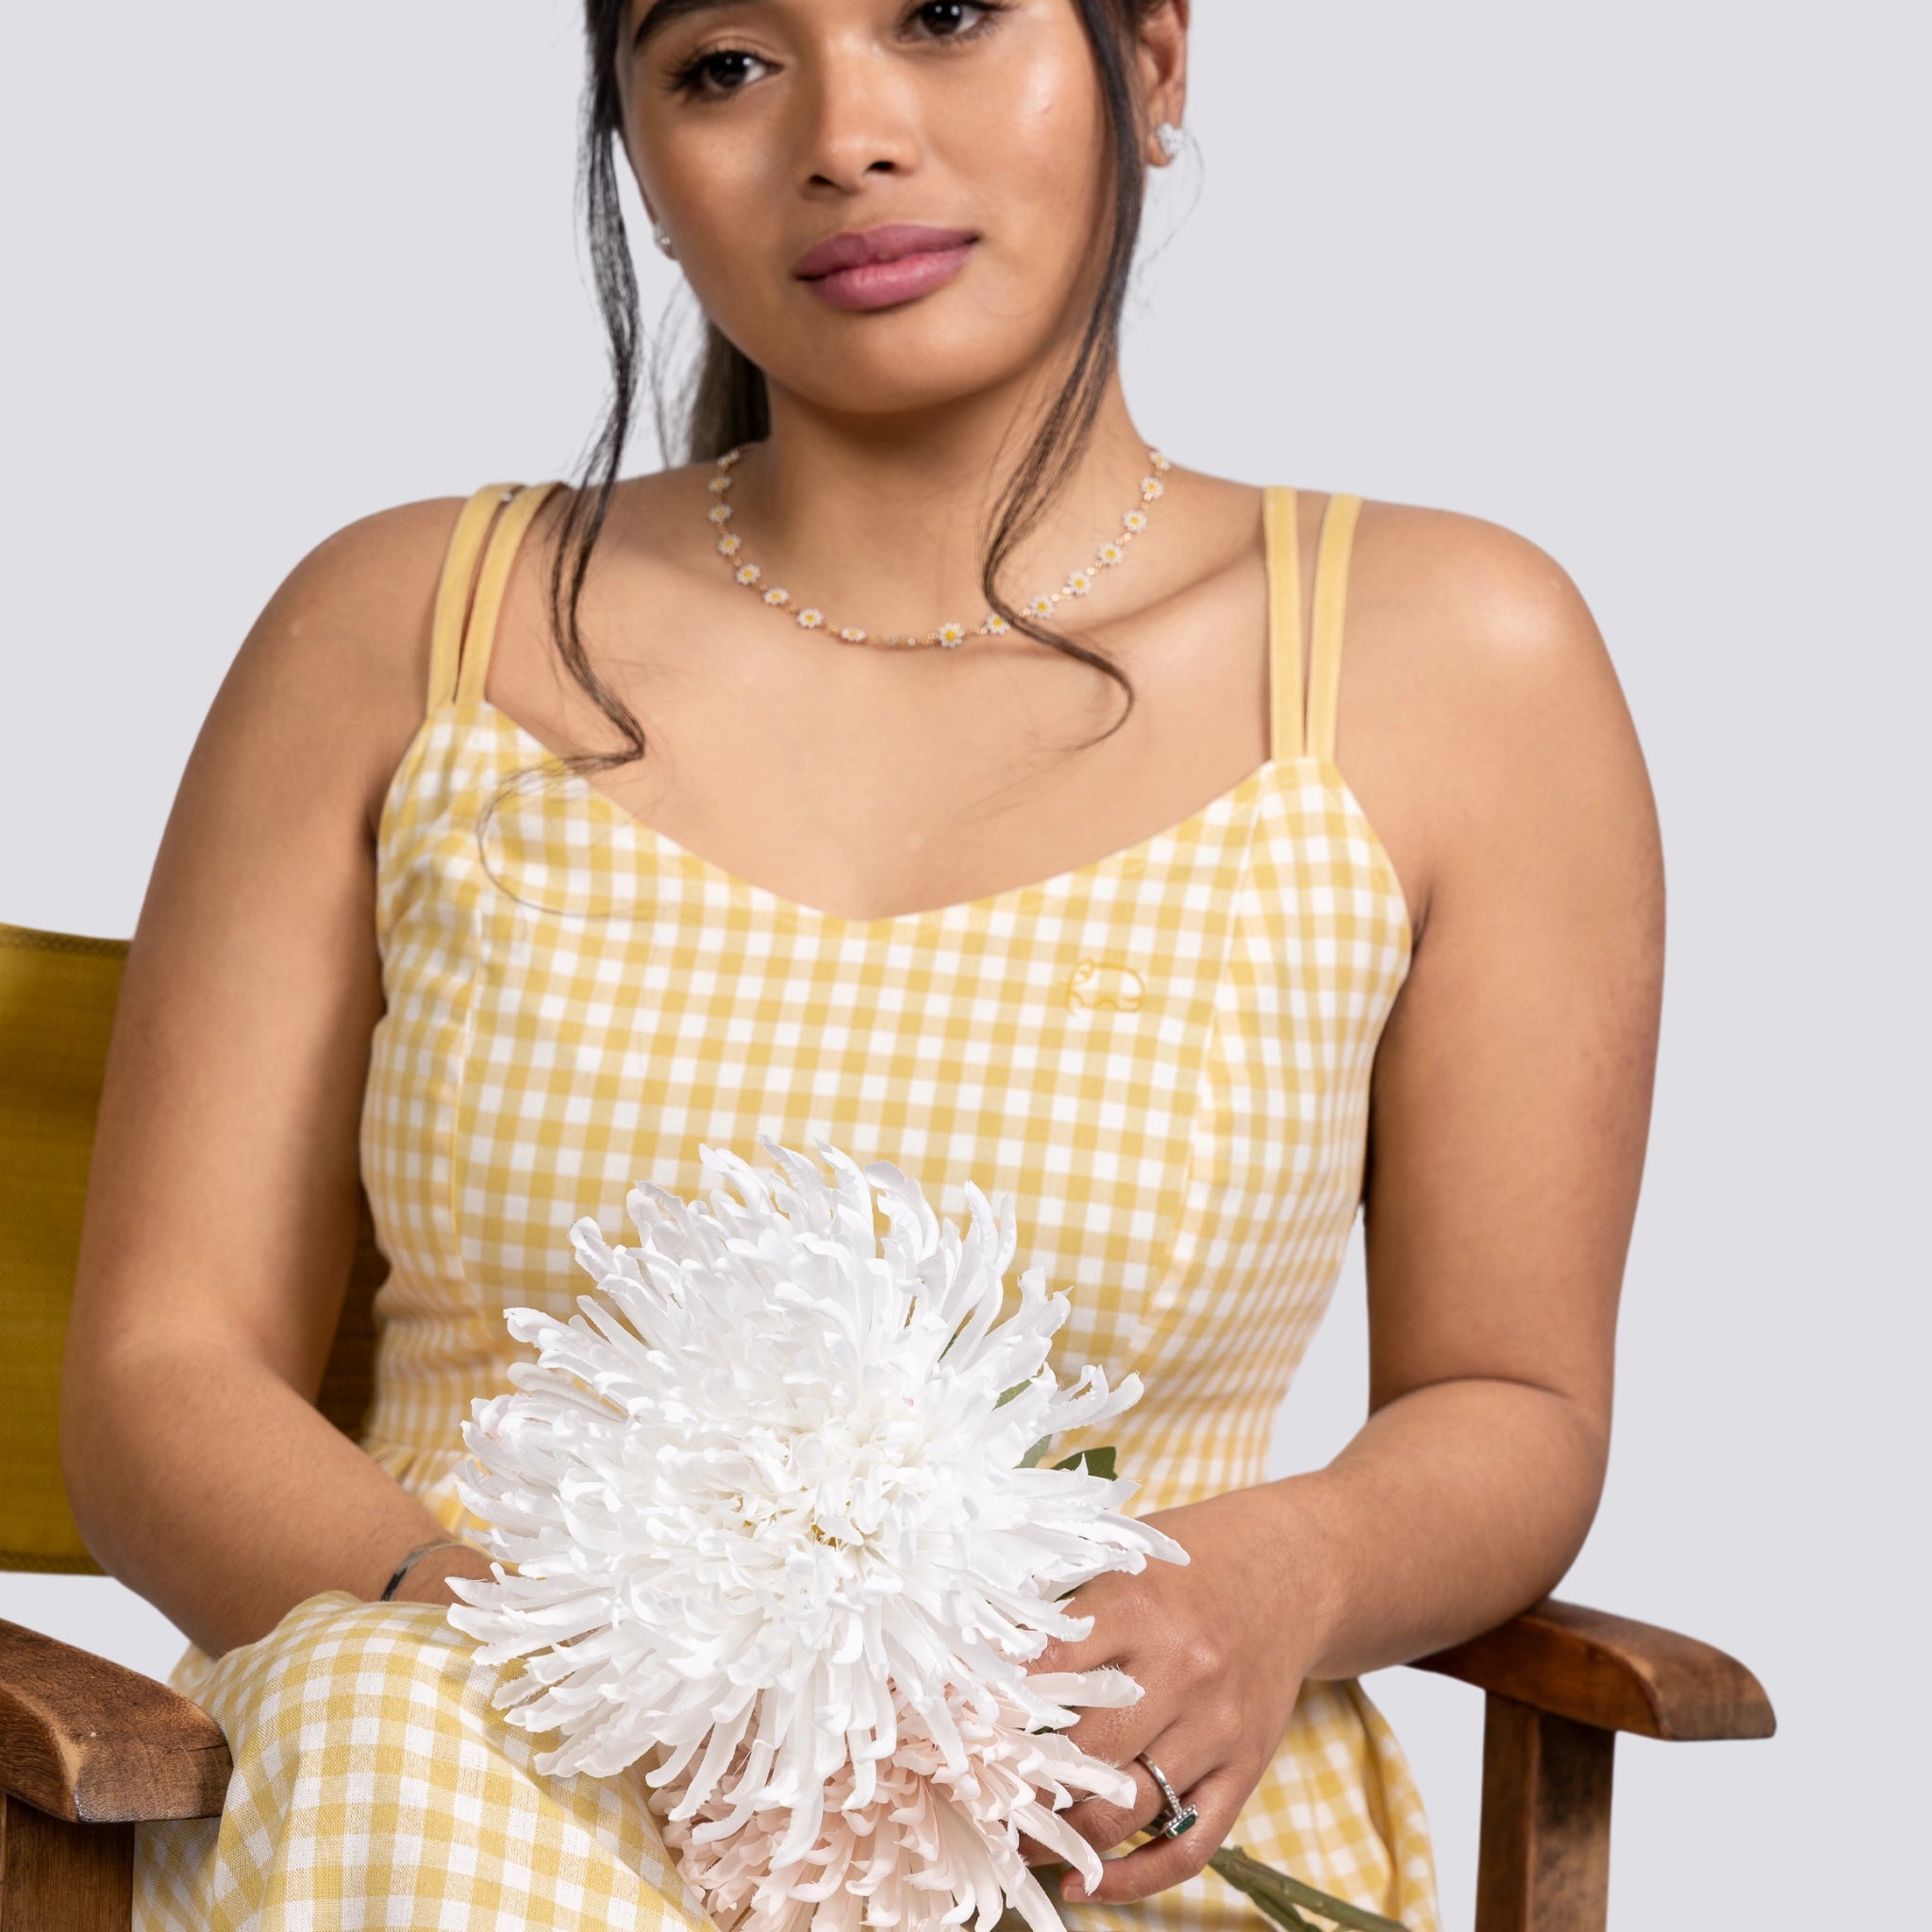 A woman in a Karee Sunshine Chic Yellow Plaid Cotton Mini Dress sitting on a chair, holding a large white chrysanthemum, looking at the camera.